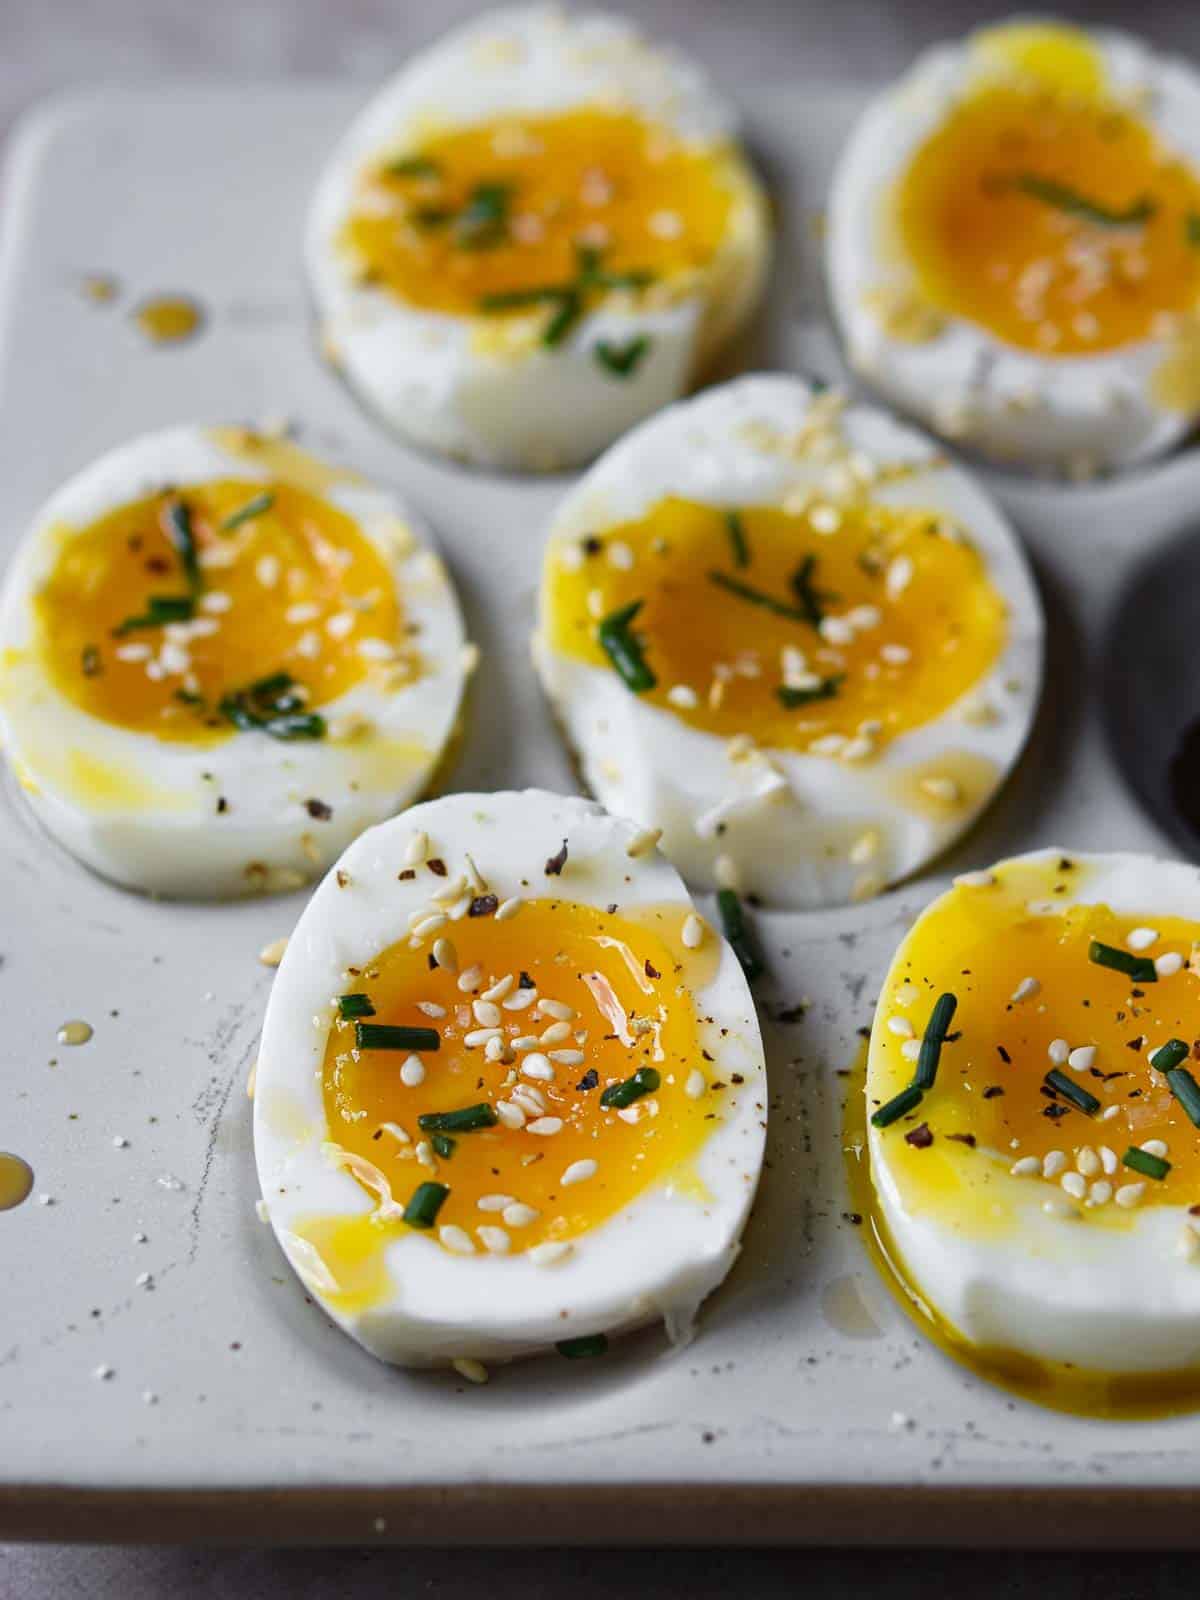 Soft-boiled eggs with sesame oil and toasted sesame seeds cut open on a platter.